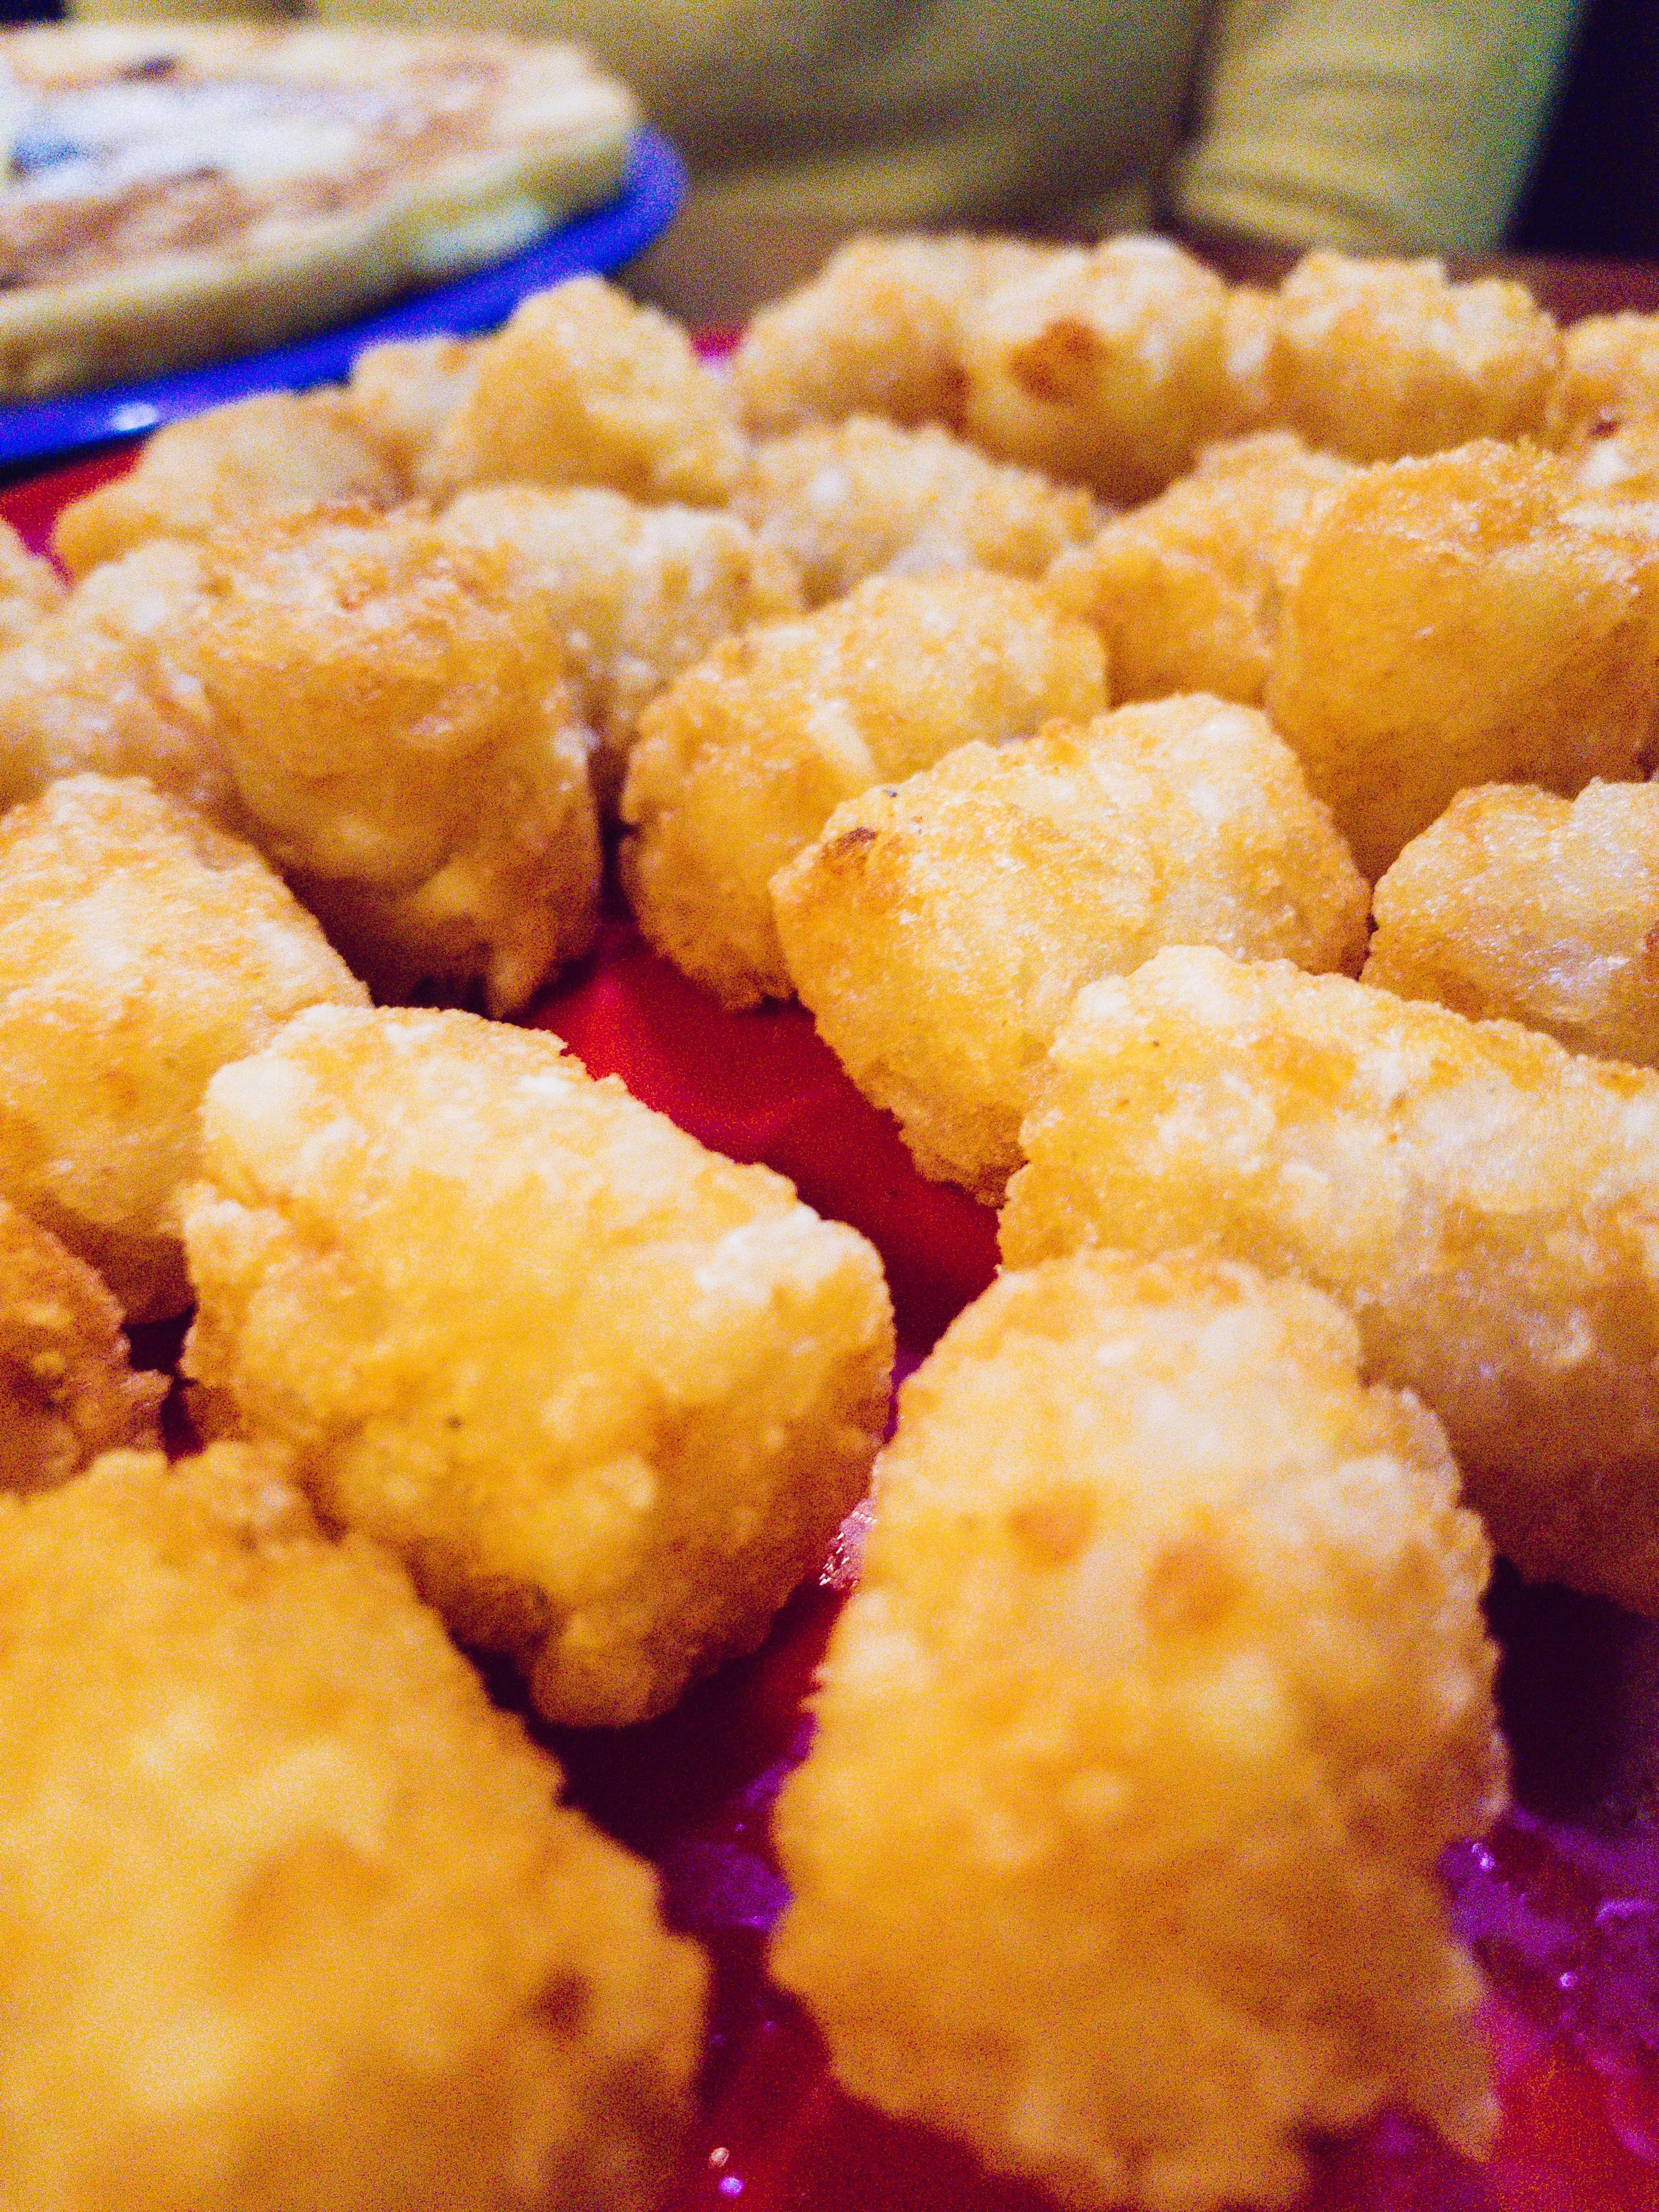 Nuggets filled with cheddar cheese? Yes please (